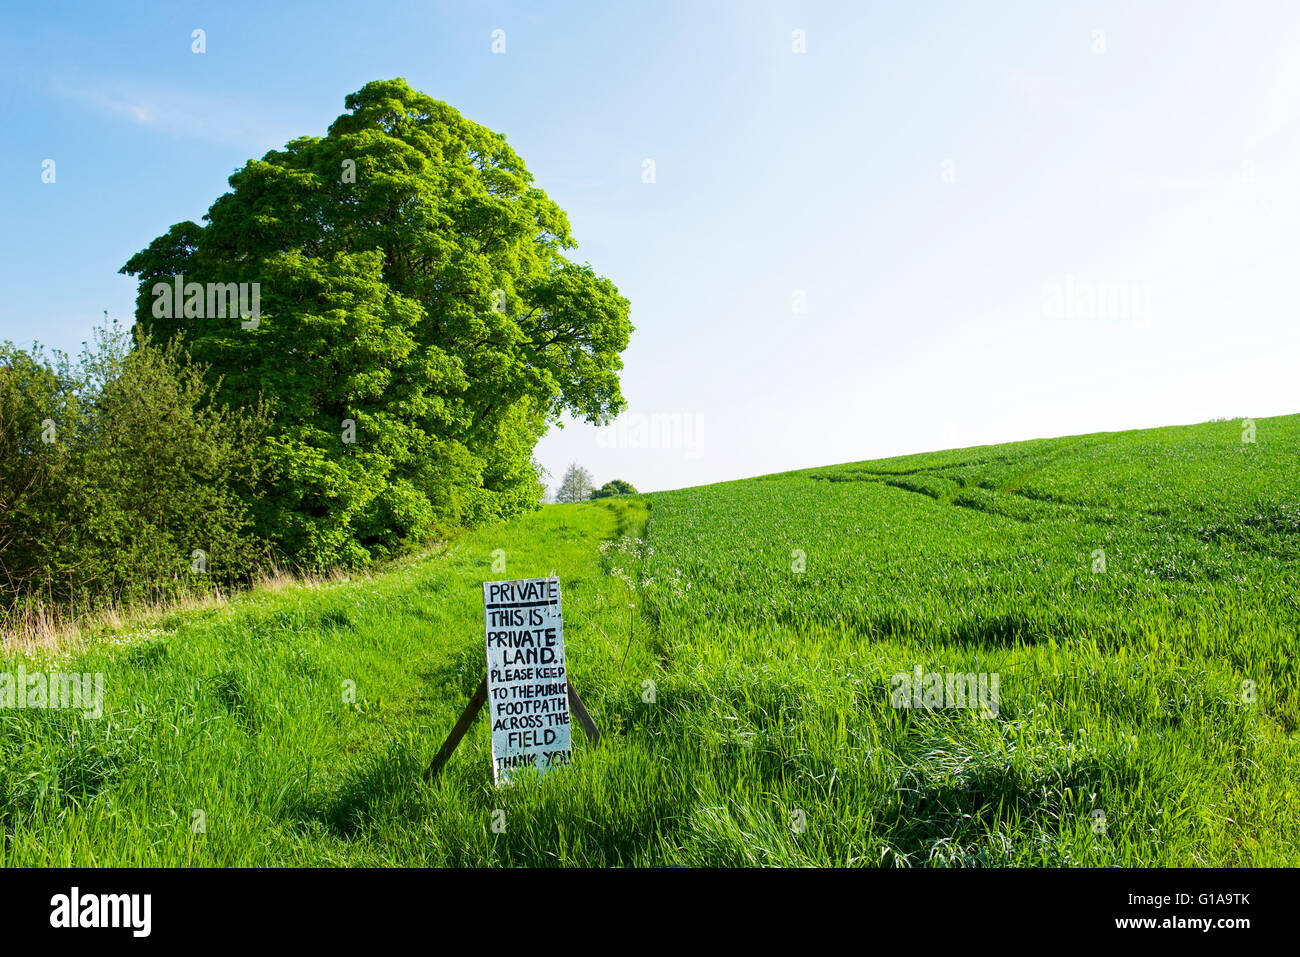 Sign in field saying this is private land, England UK Stock Photo